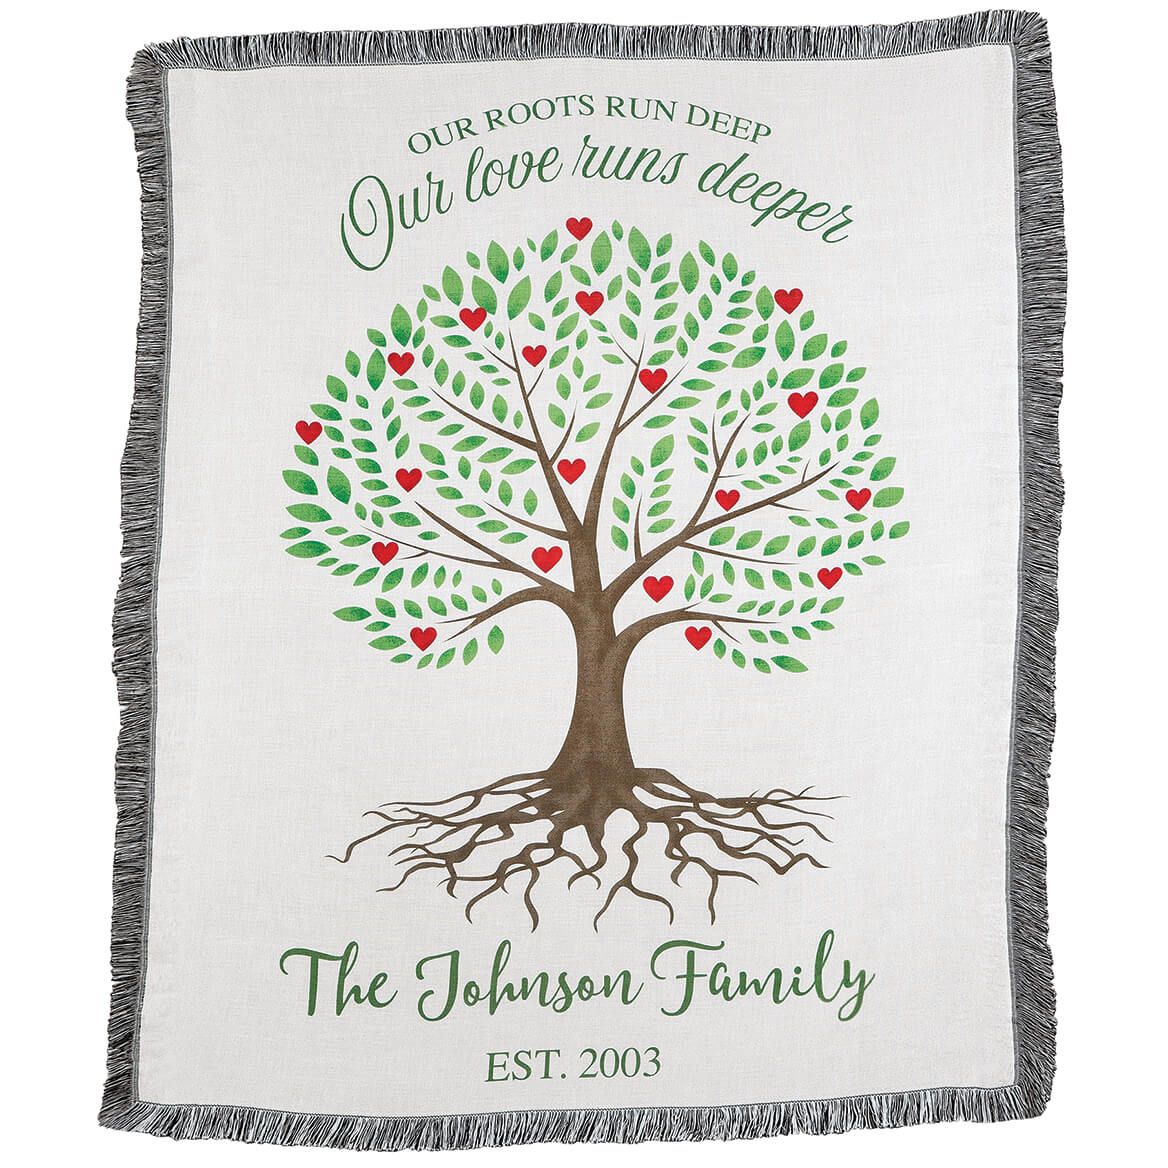 Personalized “Roots Run Deep” Throw Blanket - Miles Kimball + '-' + 374702